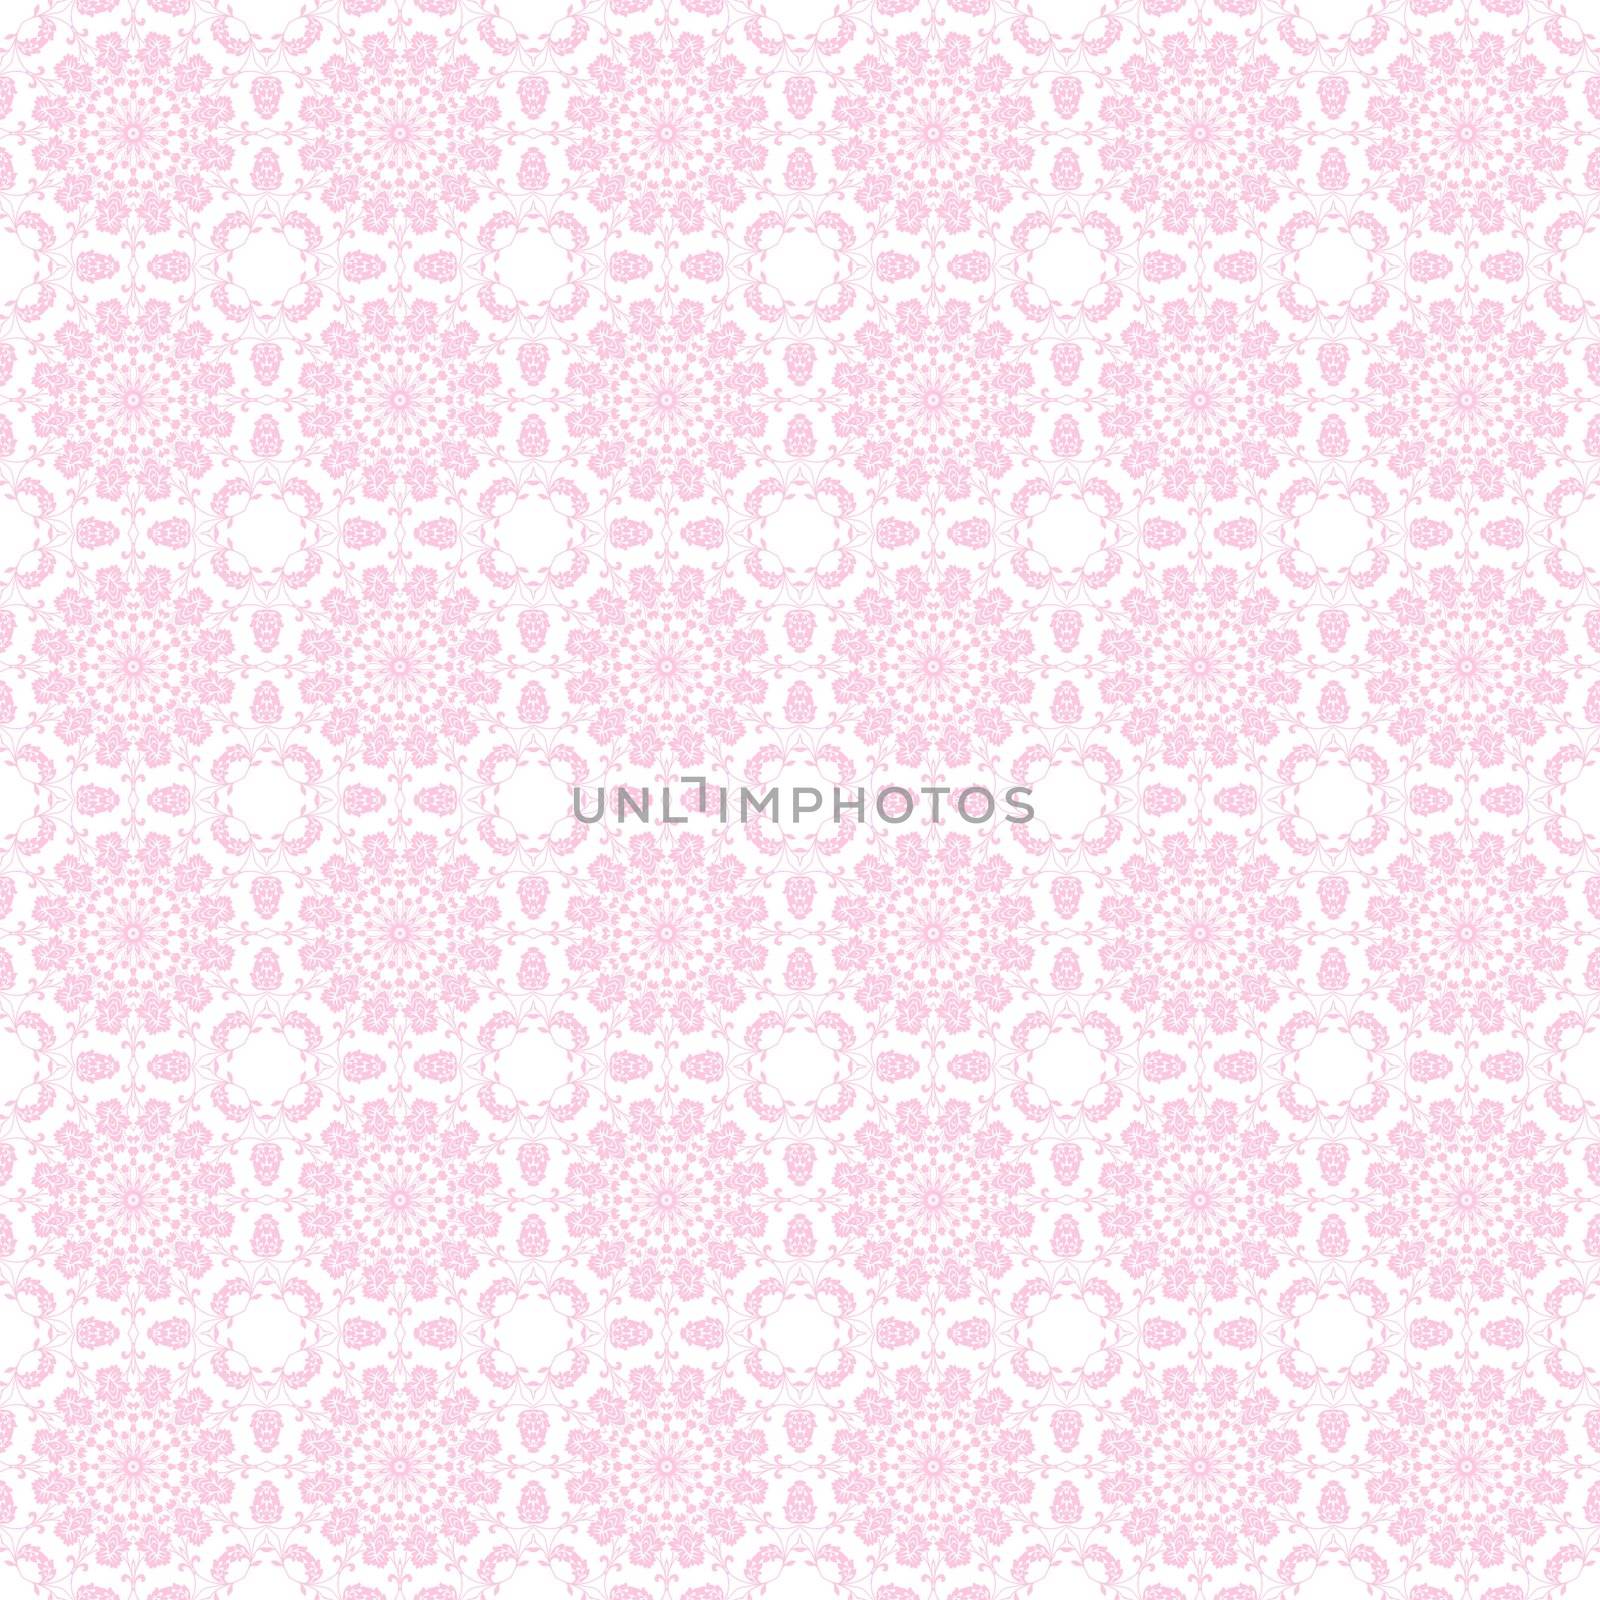 Baby pink vine elements combine in kaleidoscope patterns for a damask style pattern